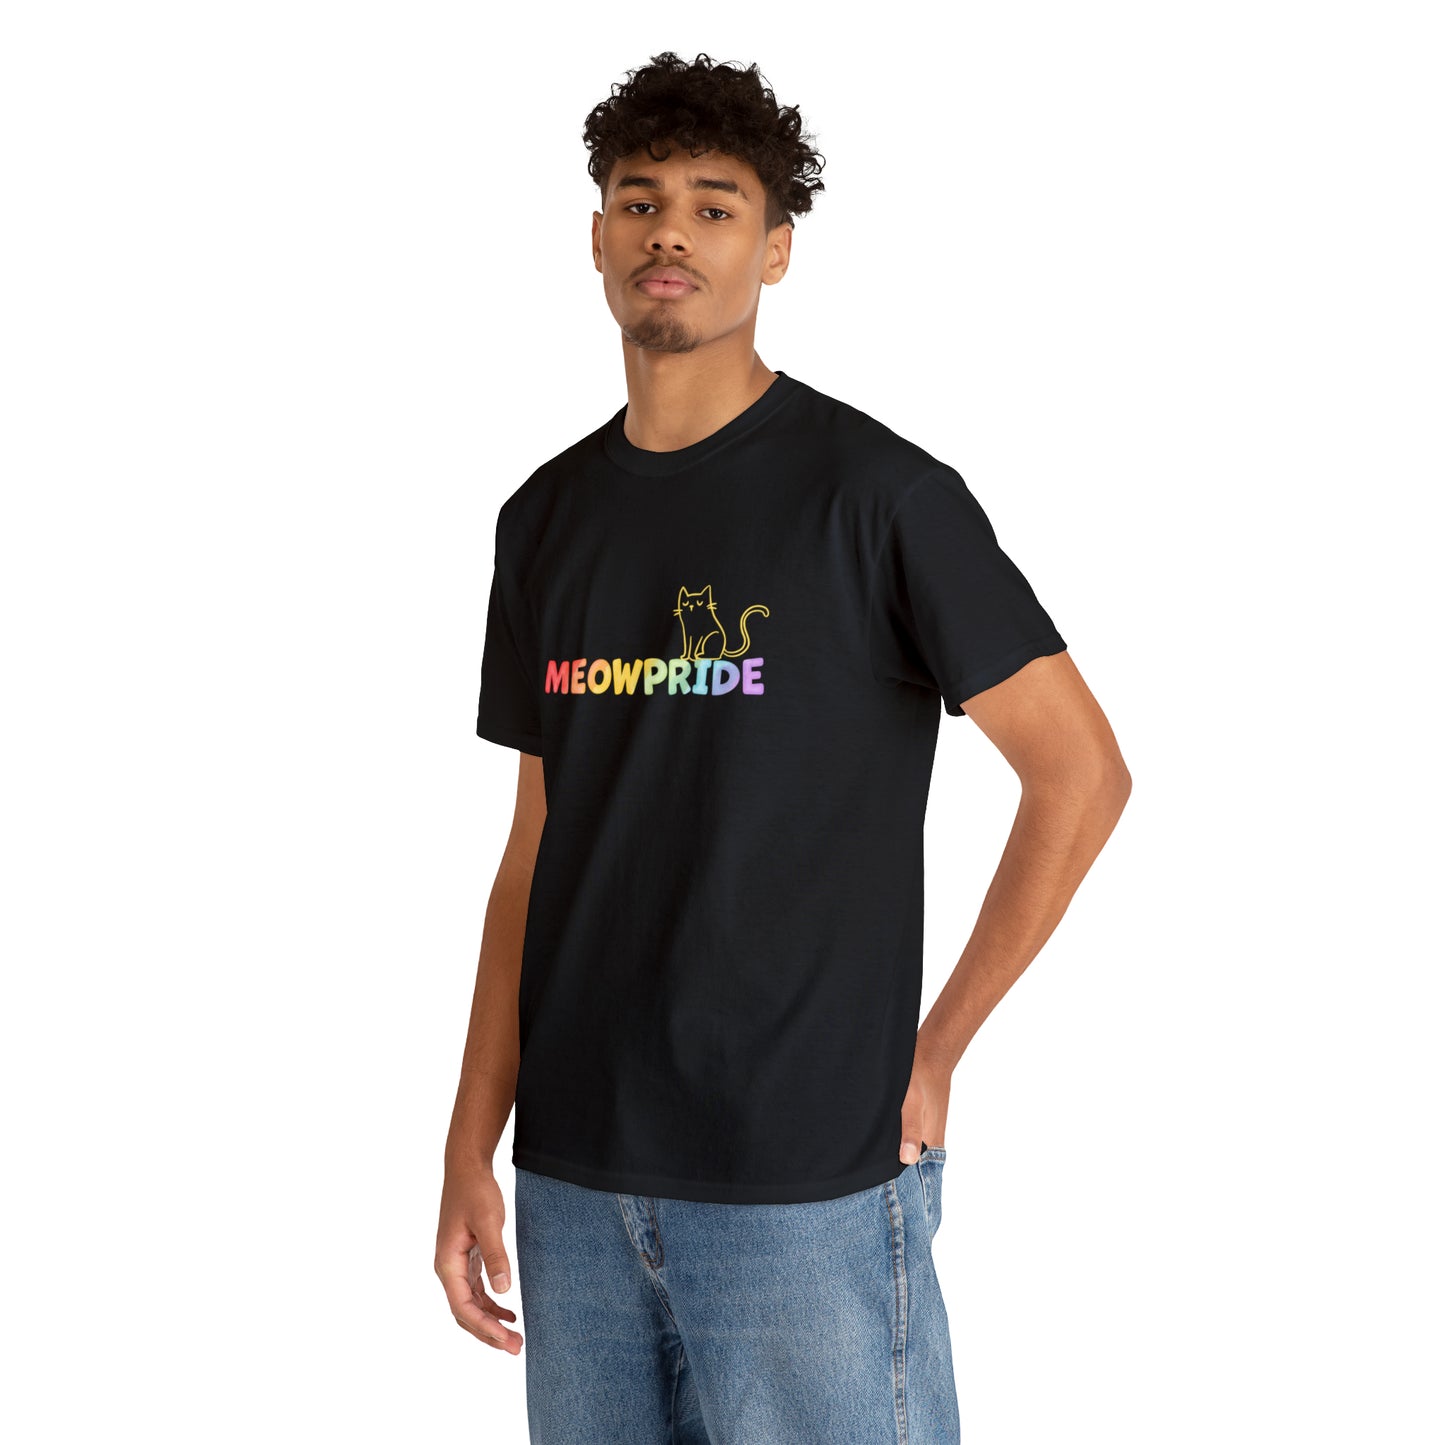 Meowpride logo with Cute Cat Cotton Tee